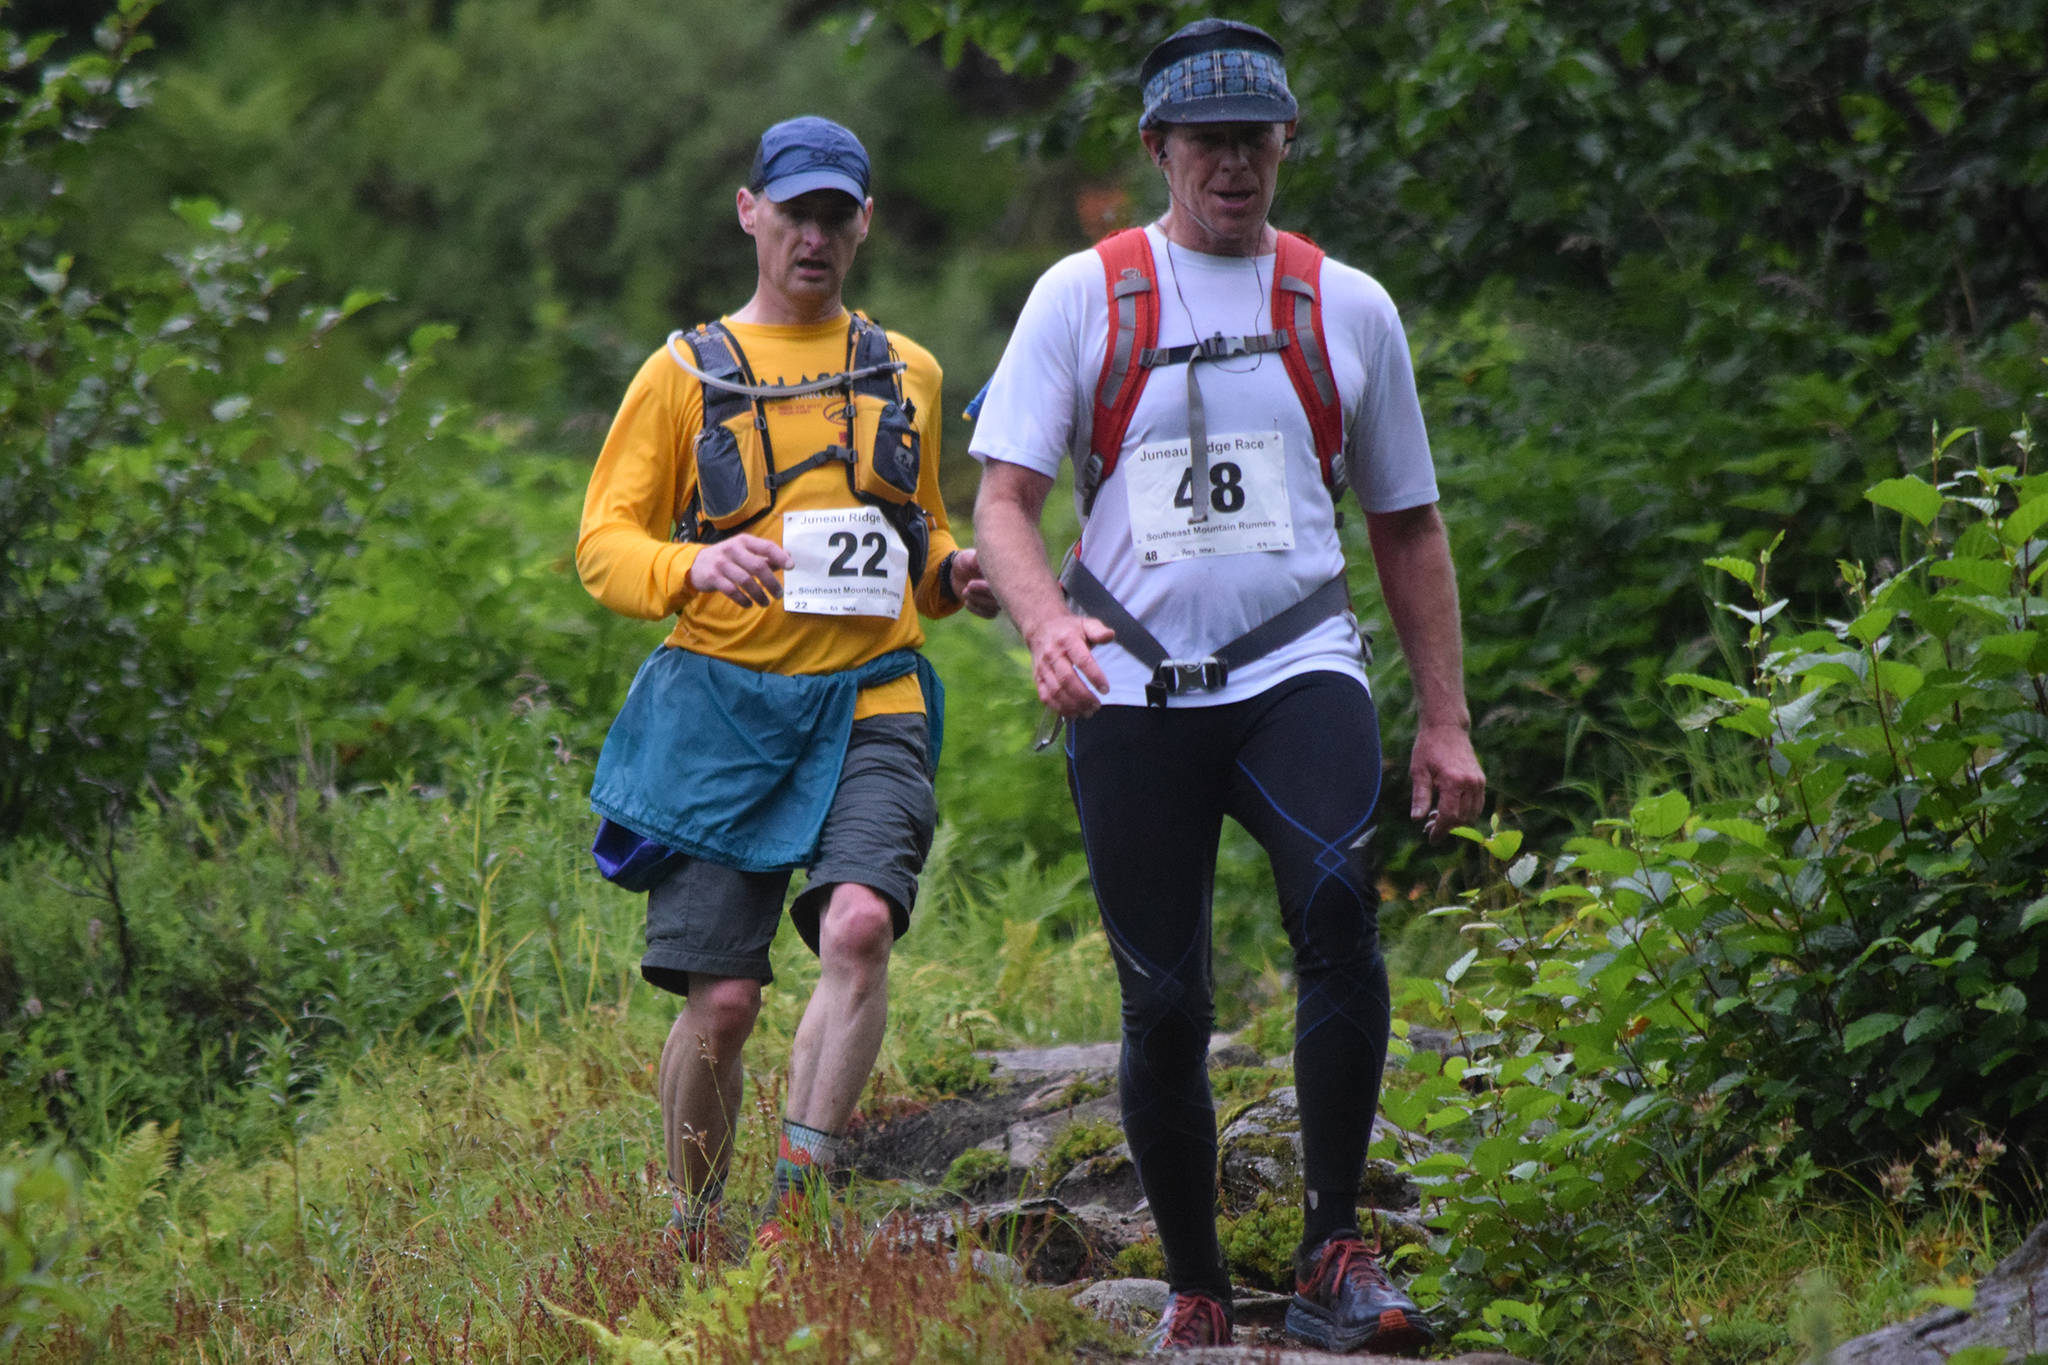 Ed Hand, left, and Ray Imel descends from Mount Juneau along Granite Creek Trail while competing in the Juneau Ridge Race on Saturday, July 20, 2019. Over 60 runners participated in the 15-mile mountain running race that featured approximately 5,000 feet of elevation gain. (Nolin Ainsworth | Juneau Empire)